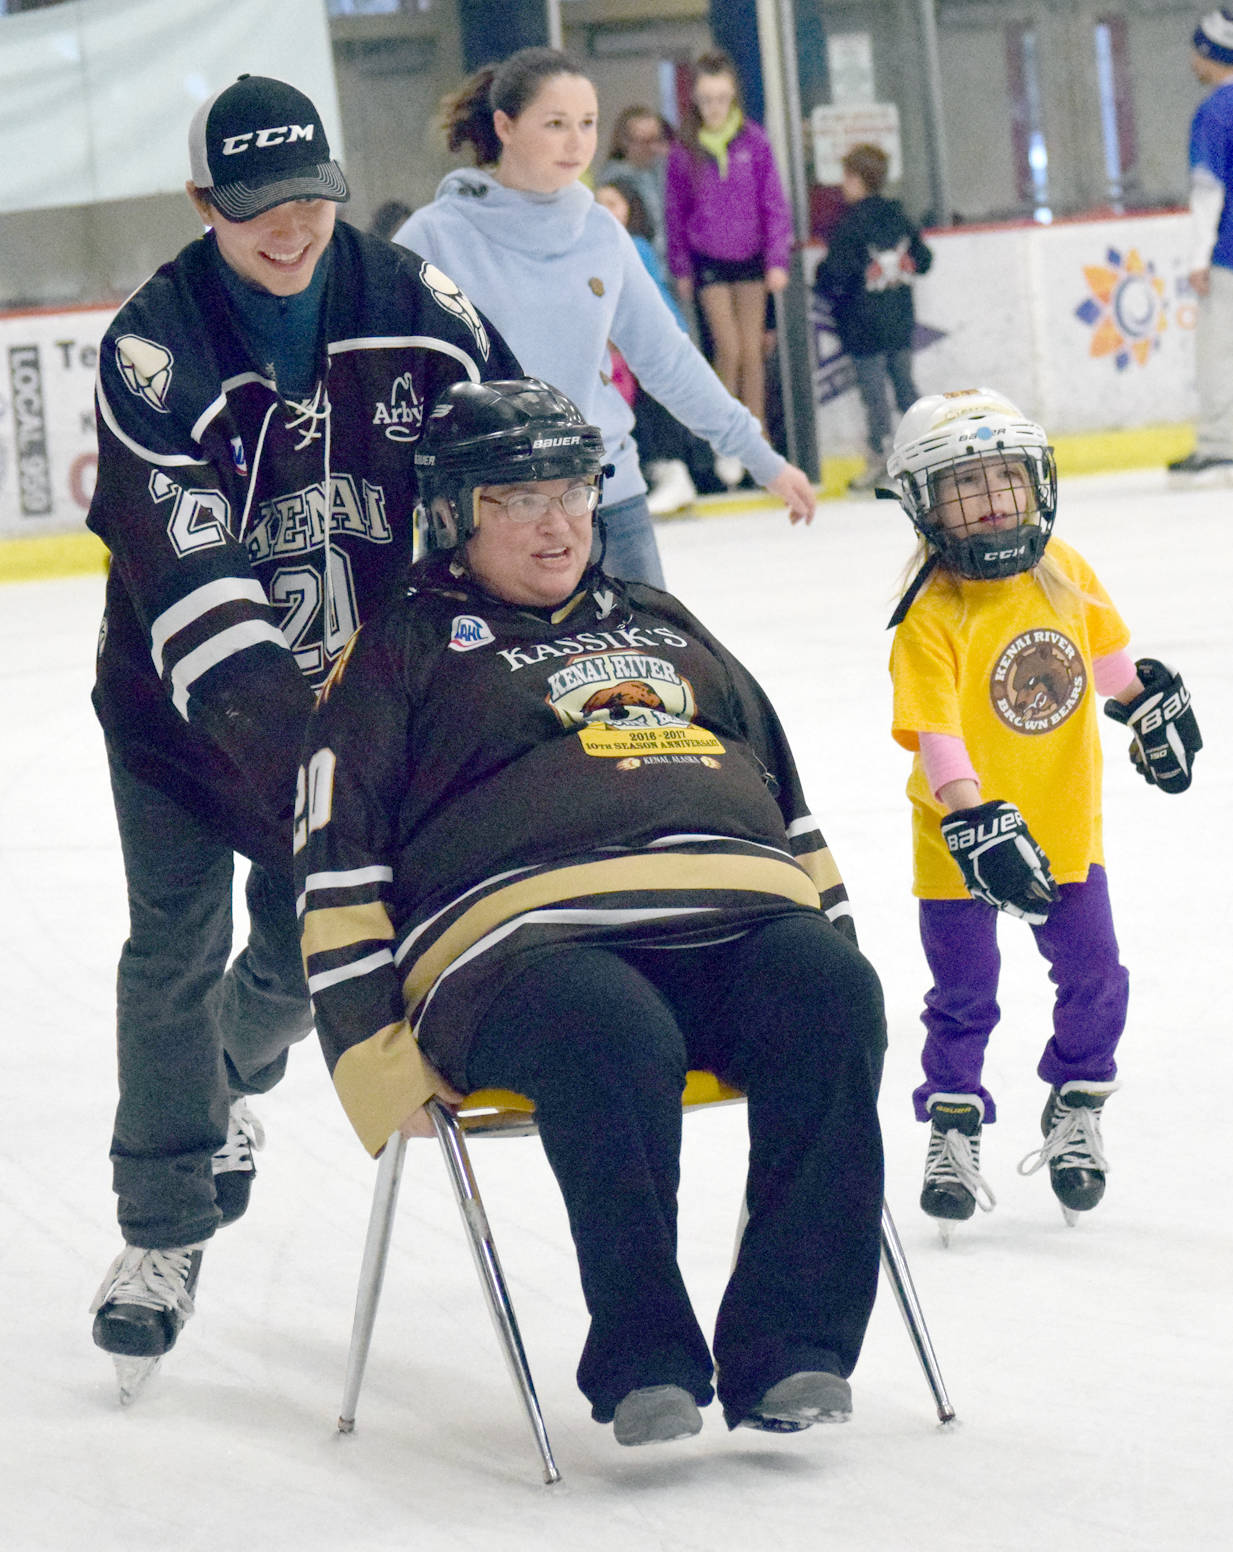 Defenseman Shayne Monahan of the Kenai River Brown Bears pushes Kasilof’s Sandra Berzanske on the ice at the Soldotna Regional Sports Complex during a fundraiser for the team Monday, April 3, 2017. (Photo by Jeff Helminiak/Peninsula Clarion)